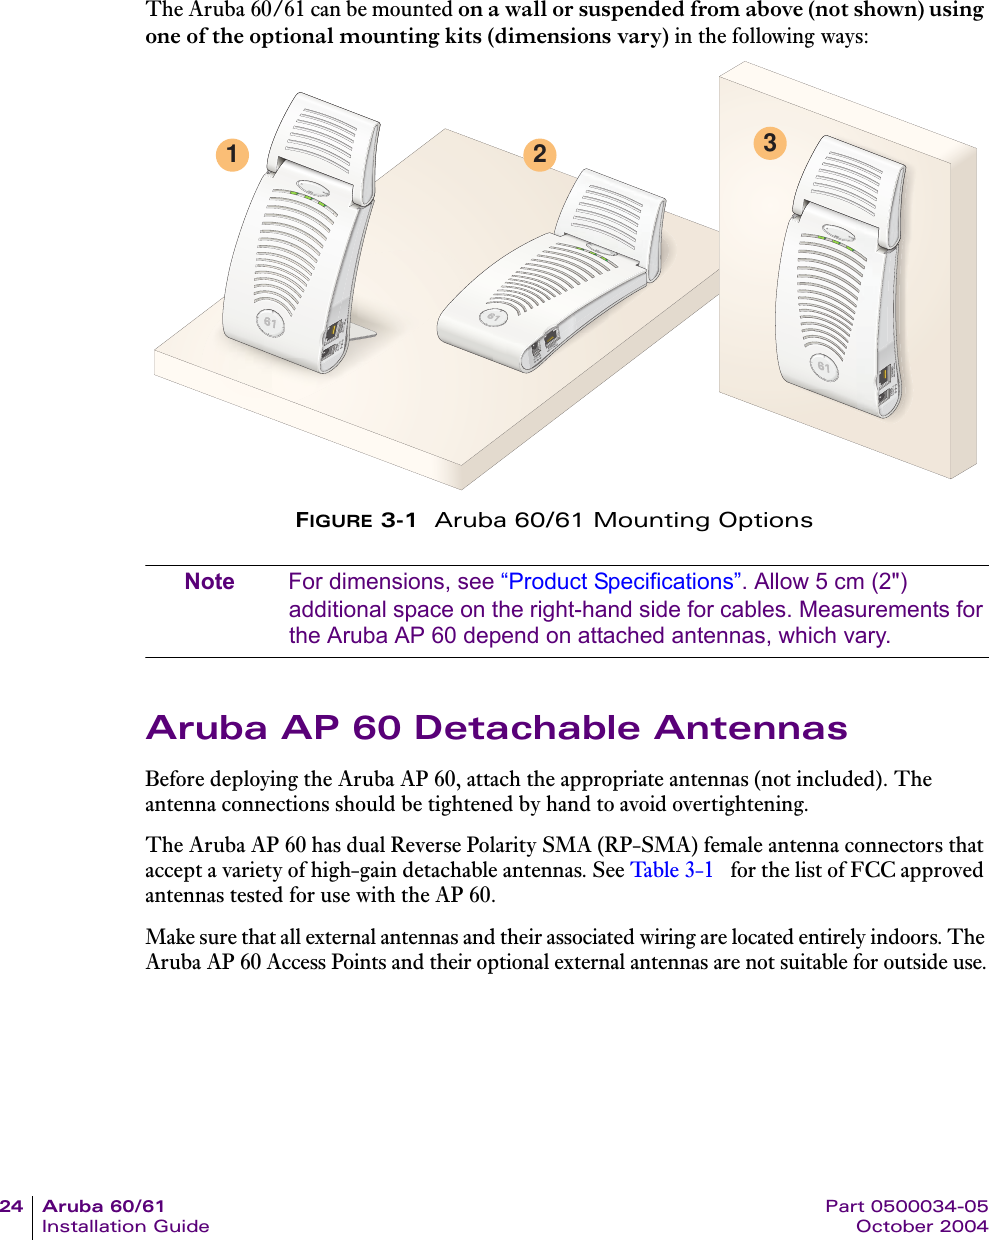 24 Aruba 60/61 Part 0500034-05Installation Guide October 2004The Aruba 60/61 can be mounted on a wall or suspended from above (not shown) using one of the optional mounting kits (dimensions vary) in the following ways:FIGURE 3-1  Aruba 60/61 Mounting OptionsNote For dimensions, see “Product Specifications”. Allow 5 cm (2&quot;) additional space on the right-hand side for cables. Measurements for the Aruba AP 60 depend on attached antennas, which vary.Aruba AP 60 Detachable AntennasBefore deploying the Aruba AP 60, attach the appropriate antennas (not included). The antenna connections should be tightened by hand to avoid overtightening.The Aruba AP 60 has dual Reverse Polarity SMA (RP-SMA) female antenna connectors that accept a variety of high-gain detachable antennas. See Table 3-1  for the list of FCC approved antennas tested for use with the AP 60.Make sure that all external antennas and their associated wiring are located entirely indoors. The Aruba AP 60 Access Points and their optional external antennas are not suitable for outside use.1 2 3